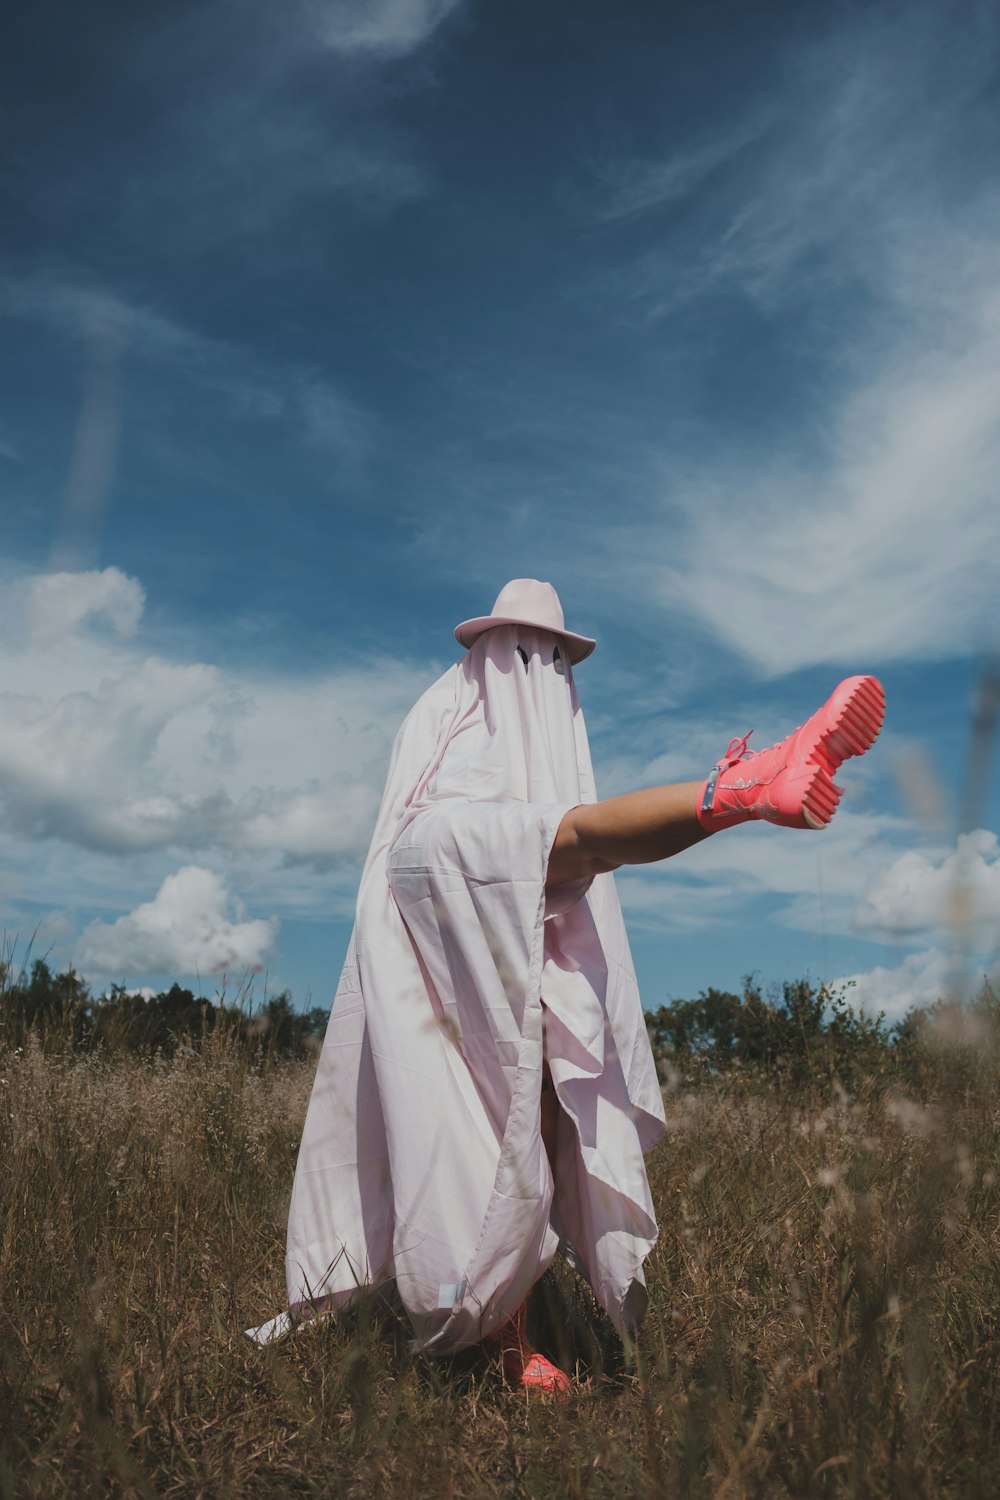 a person in a white robe and pink shoes in a field